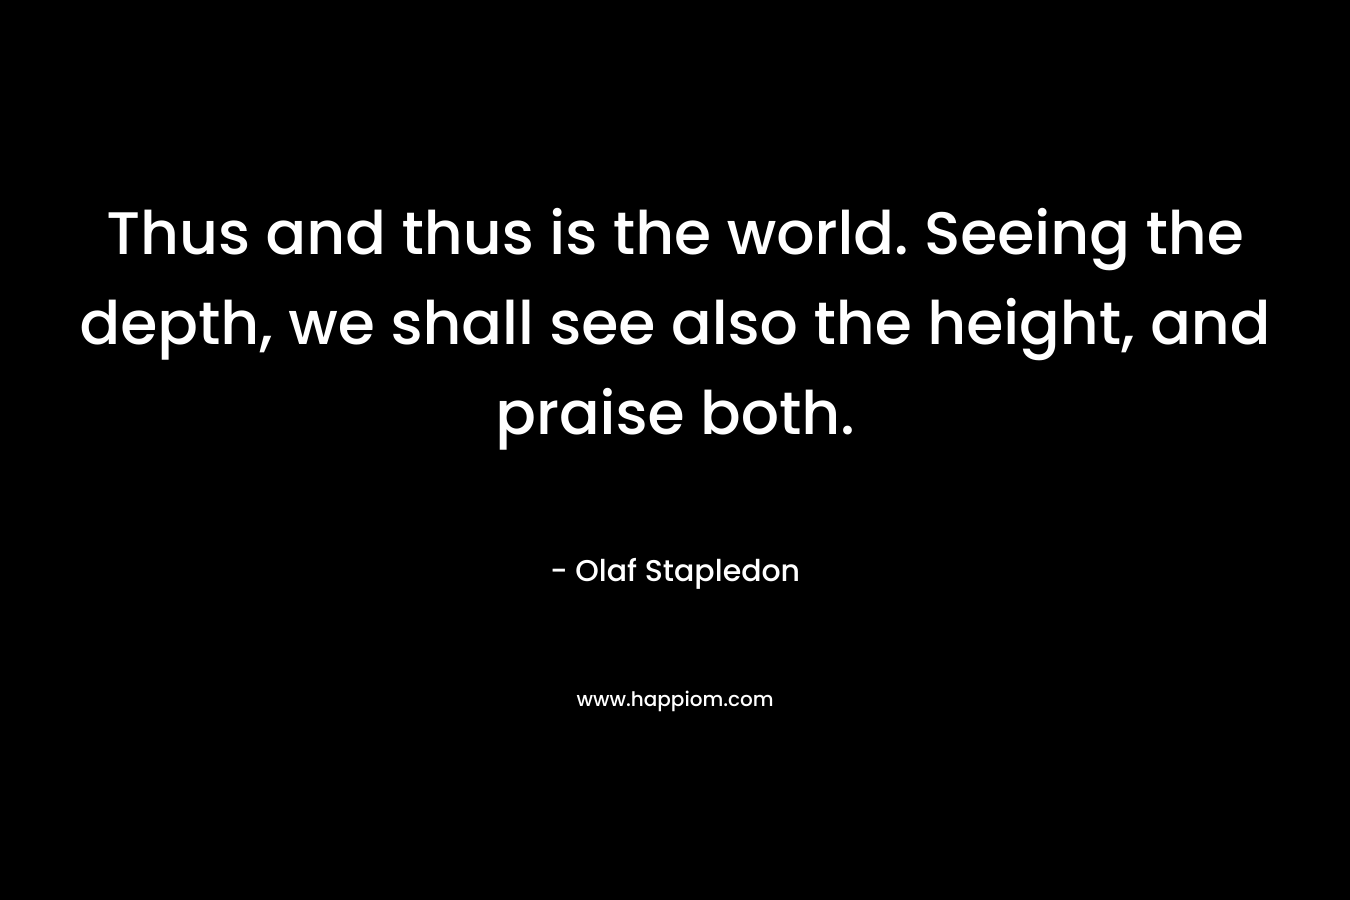 Thus and thus is the world. Seeing the depth, we shall see also the height, and praise both. – Olaf Stapledon